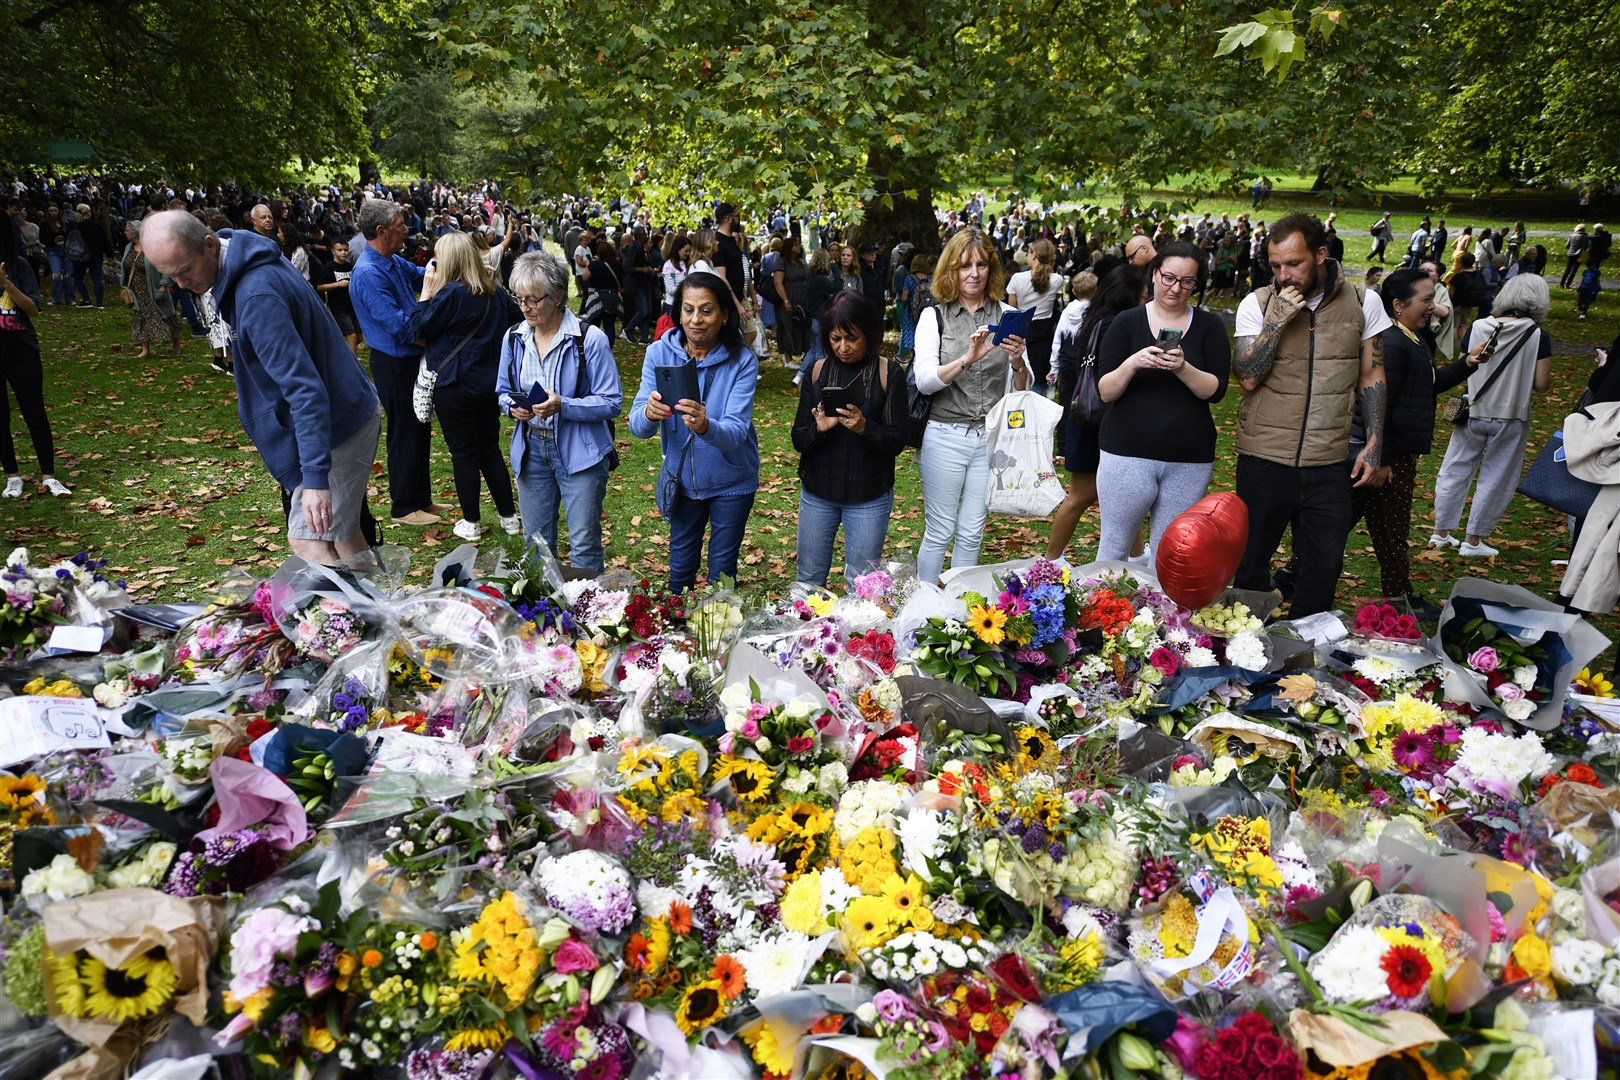 Well-wishers view floral tributes in Green Park, London, following the death of Queen Elizabeth II (Beresford Hodge/PA)